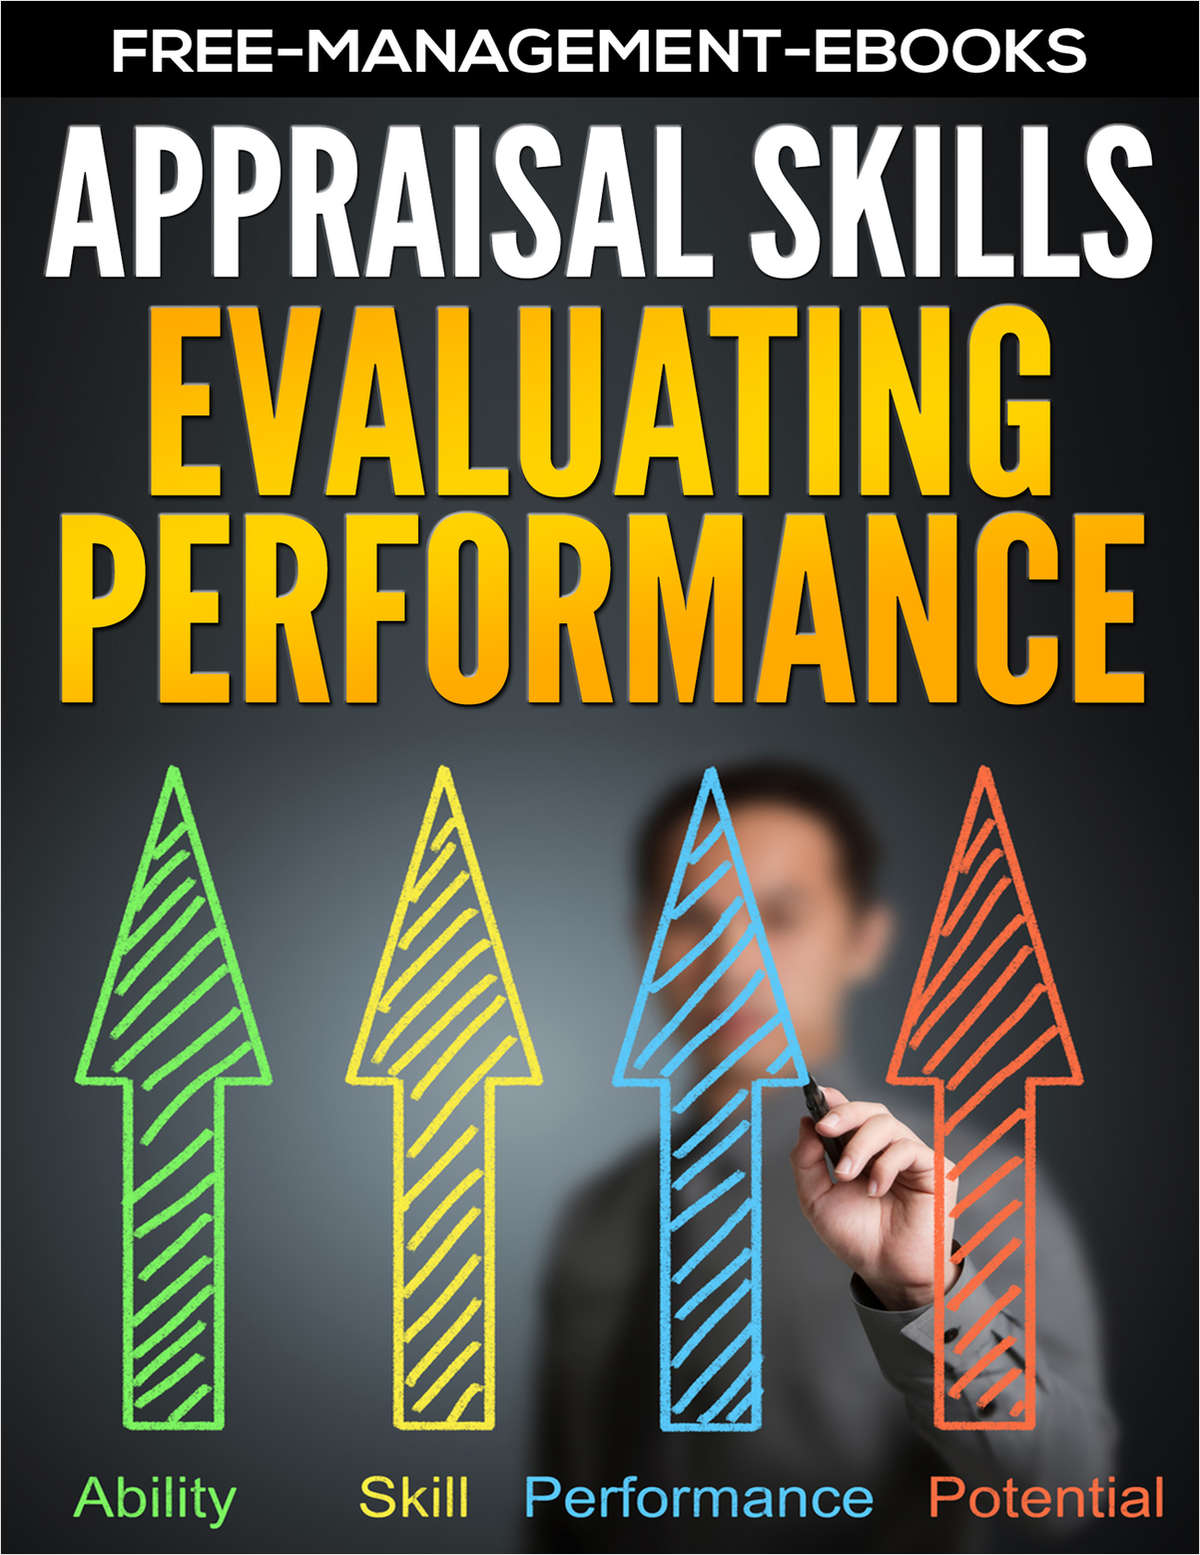 Evaluating Performance - Developing Your Appraisal Skills